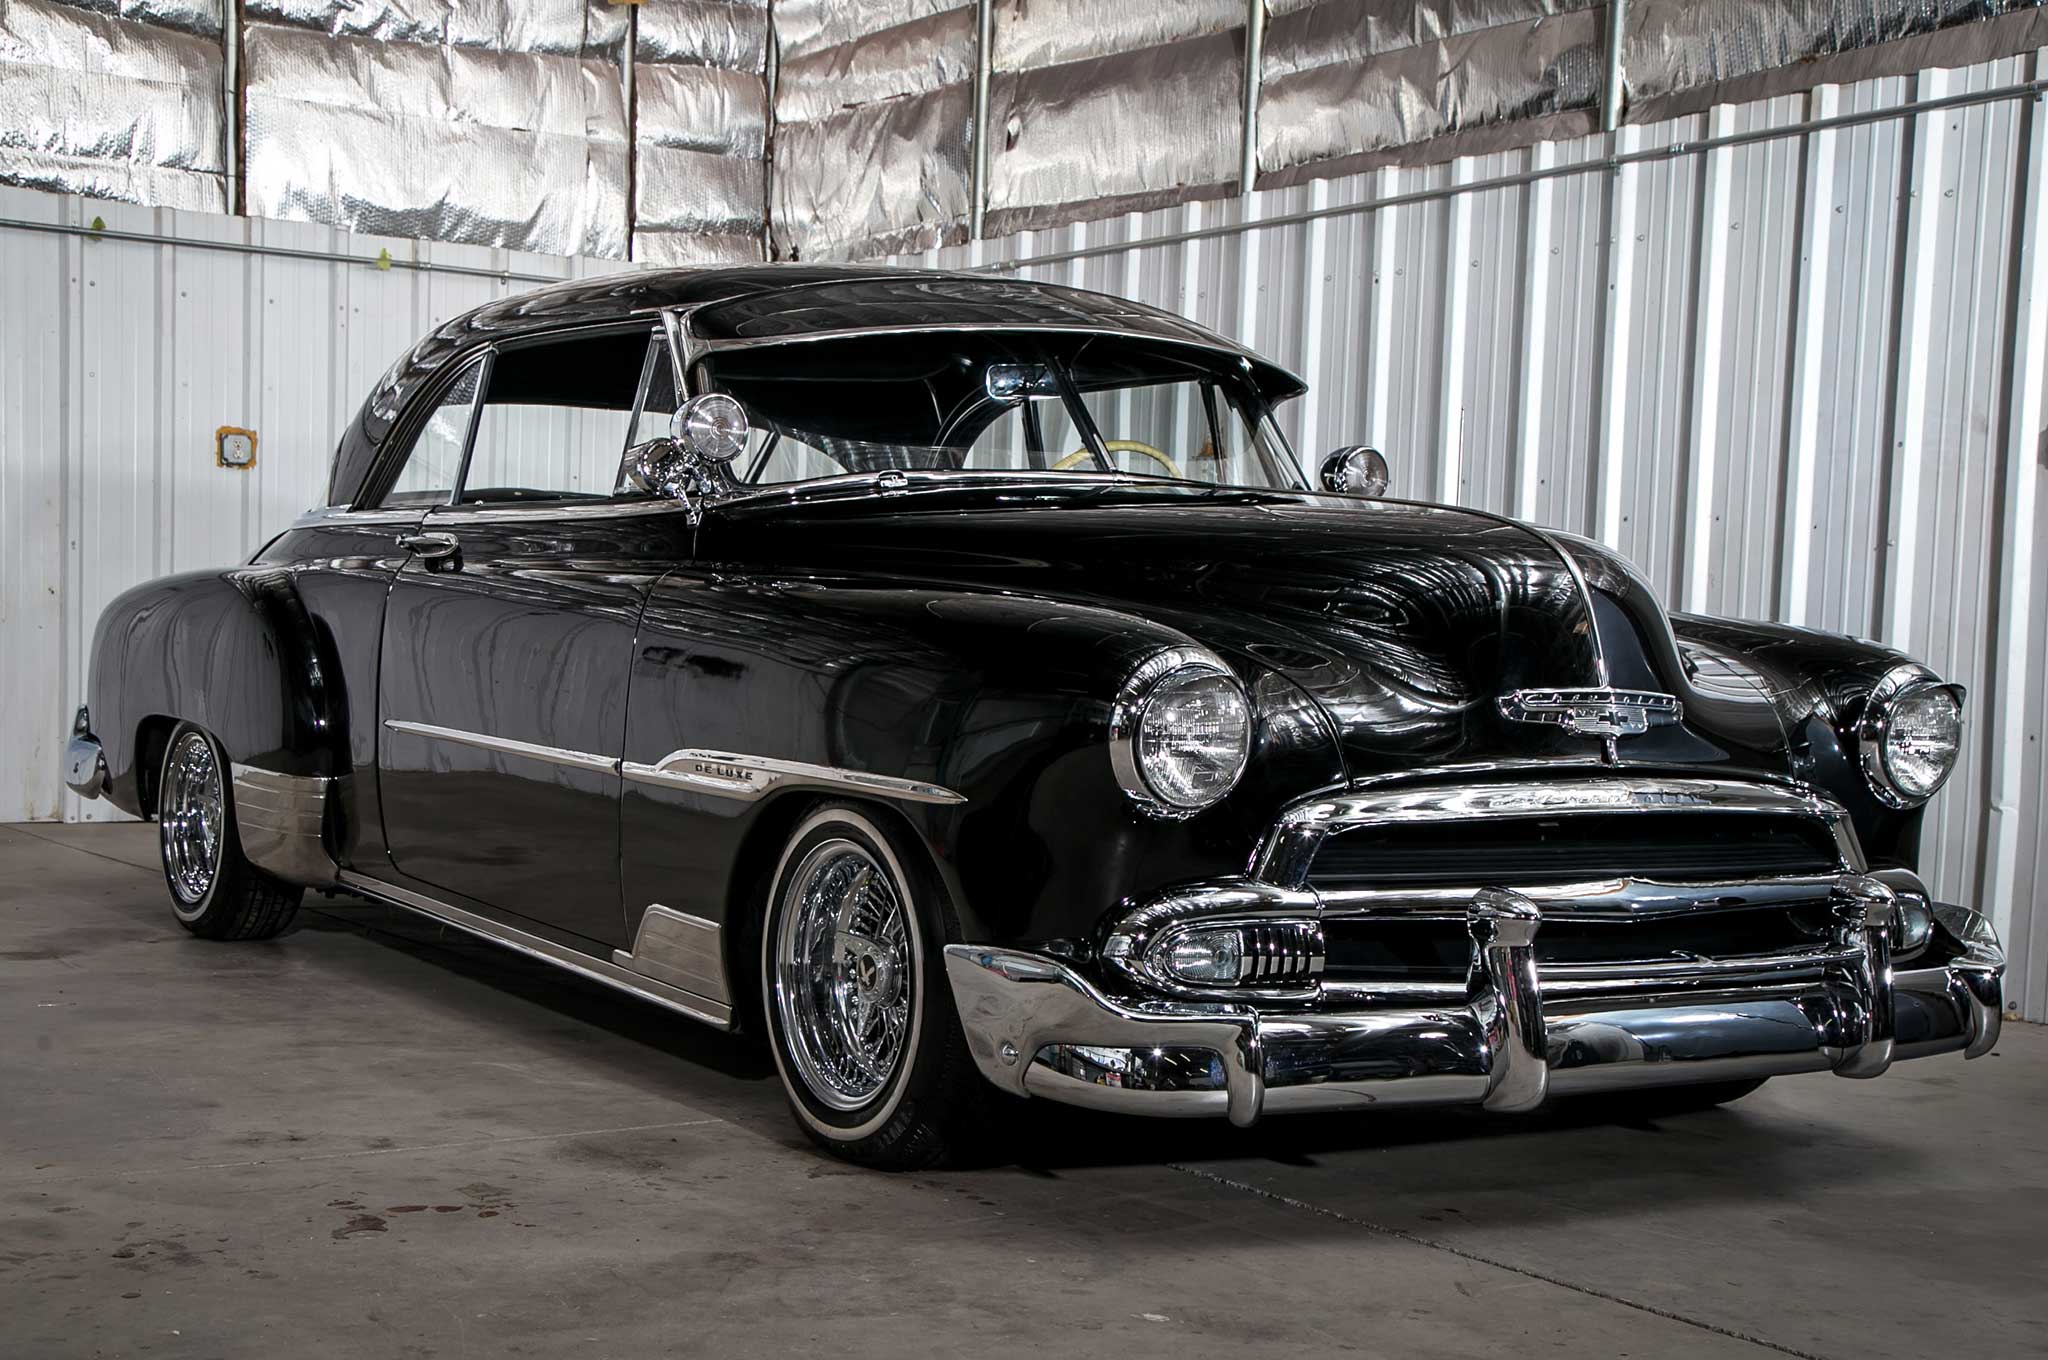 1951 Chevy DeLuxe with a Lowrider Flare